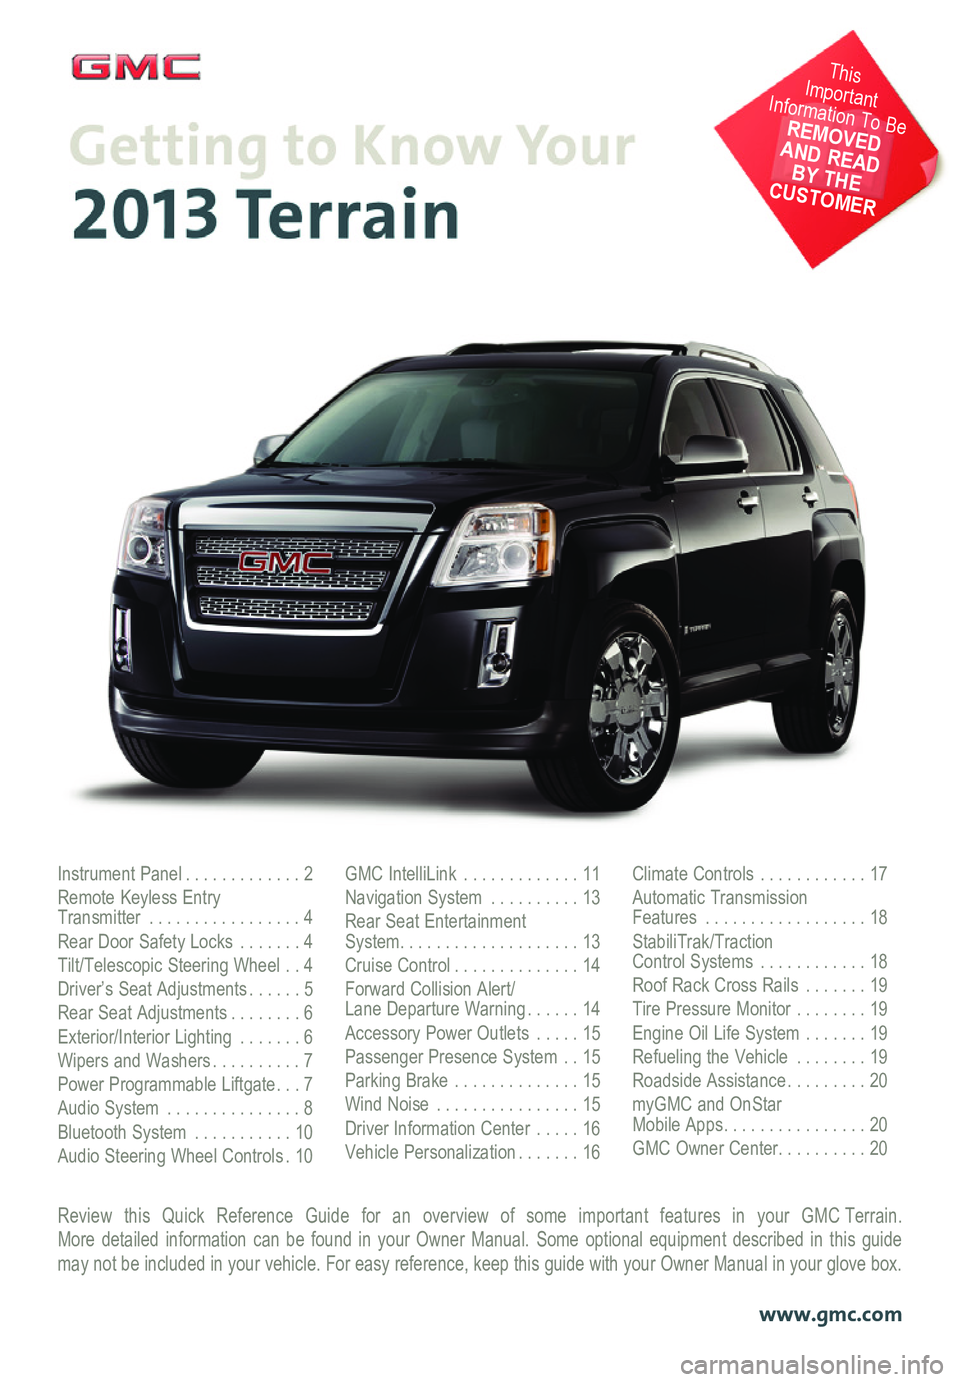 GMC TERRAIN 2013  Get To Know Guide Review this Quick Reference Guide for an overview of some important features in your GMC Terrain.  More detailed information can be found in your Owner Manual. Some option\
al equipment described in t